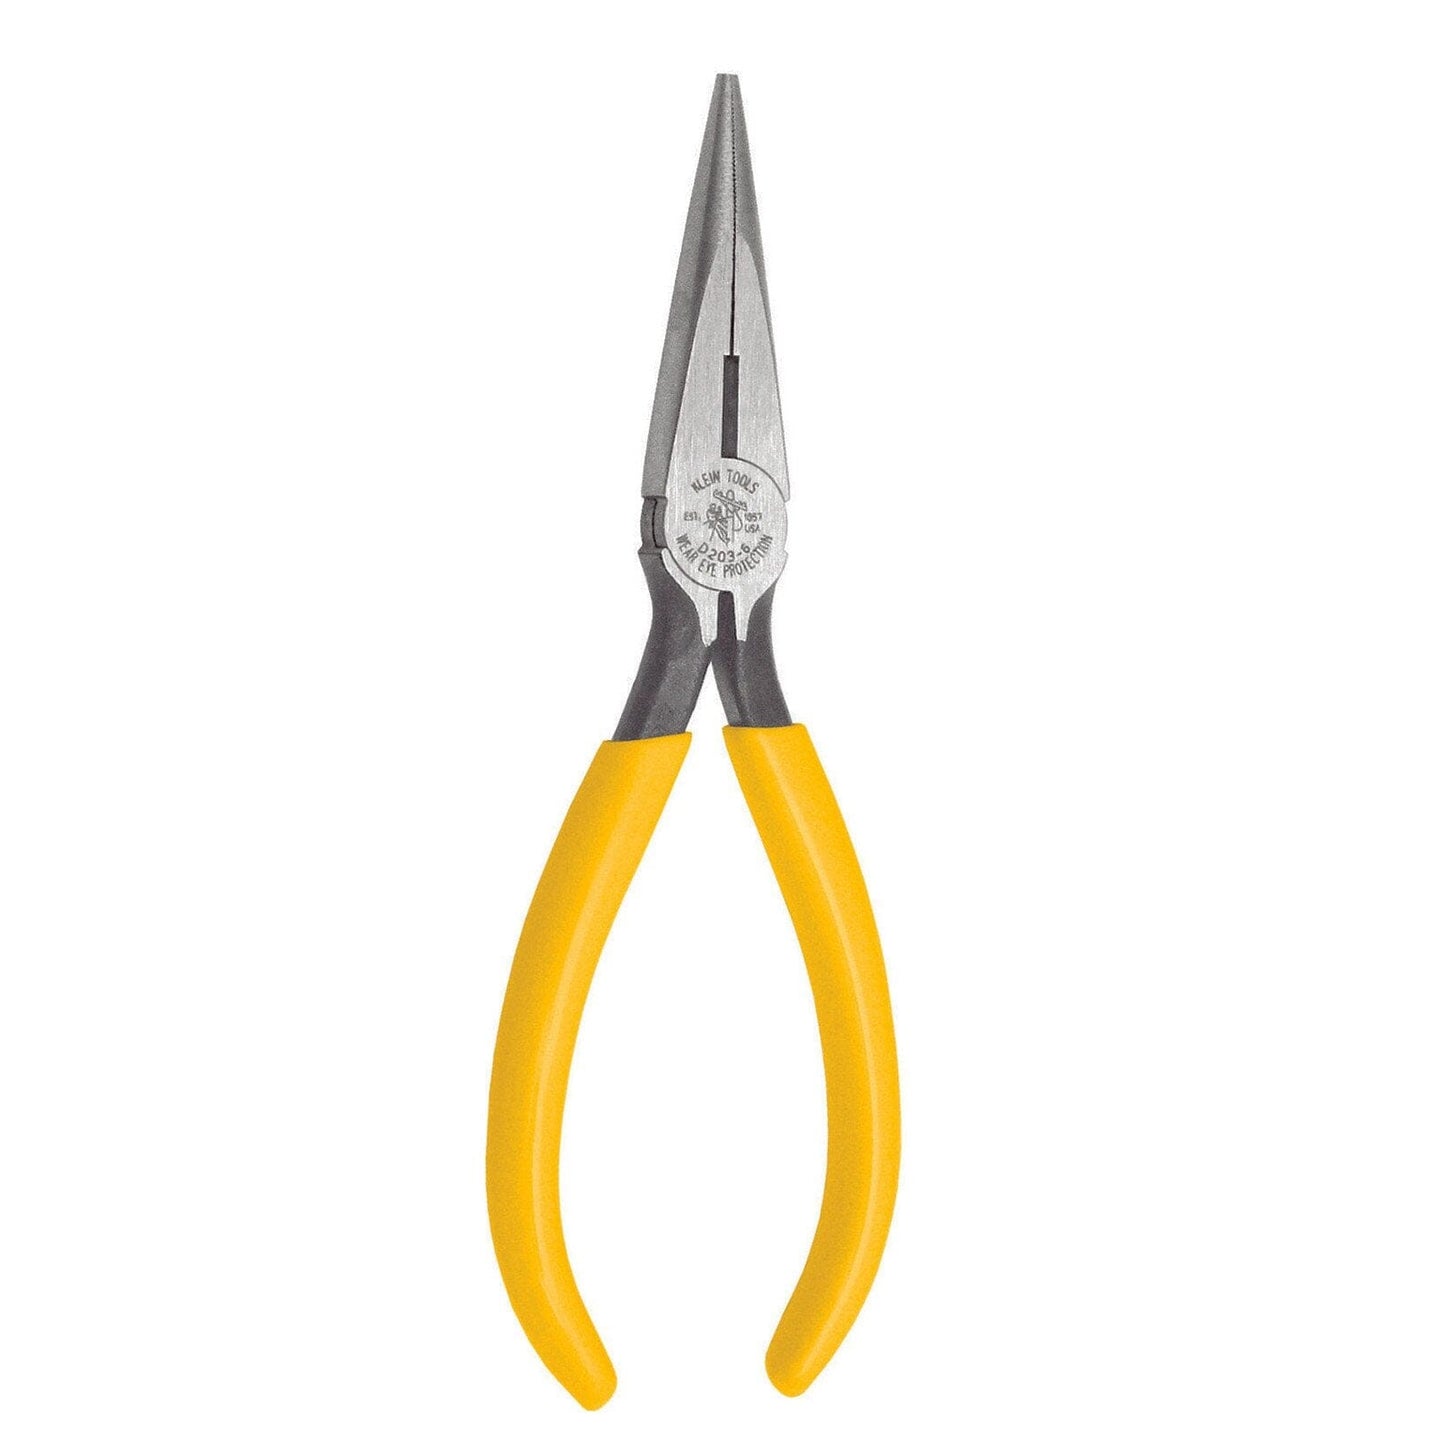 Klein Pliers, Long Nose Side-Cutters with Spring, 7-Inch - D203-7C Pliers Klein Tools 